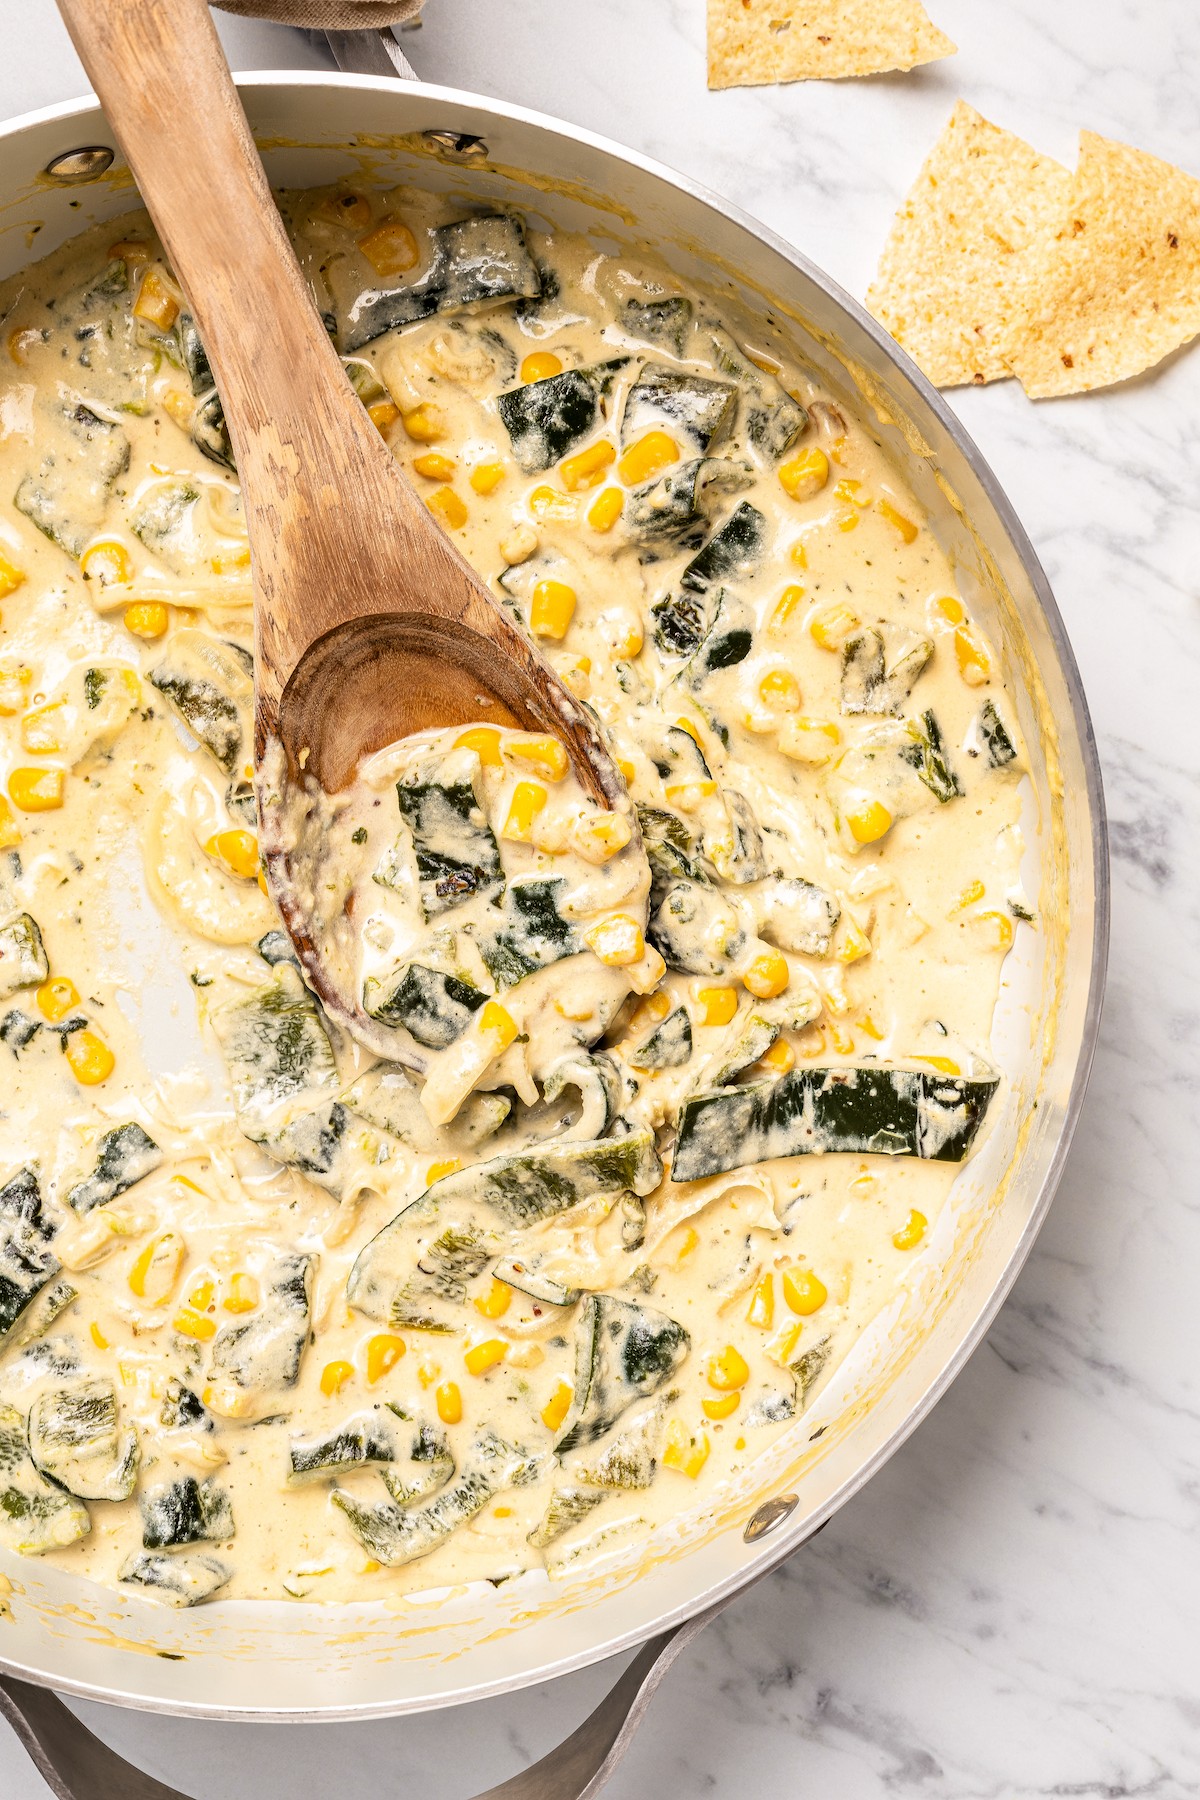 Pan with creamy rajas.